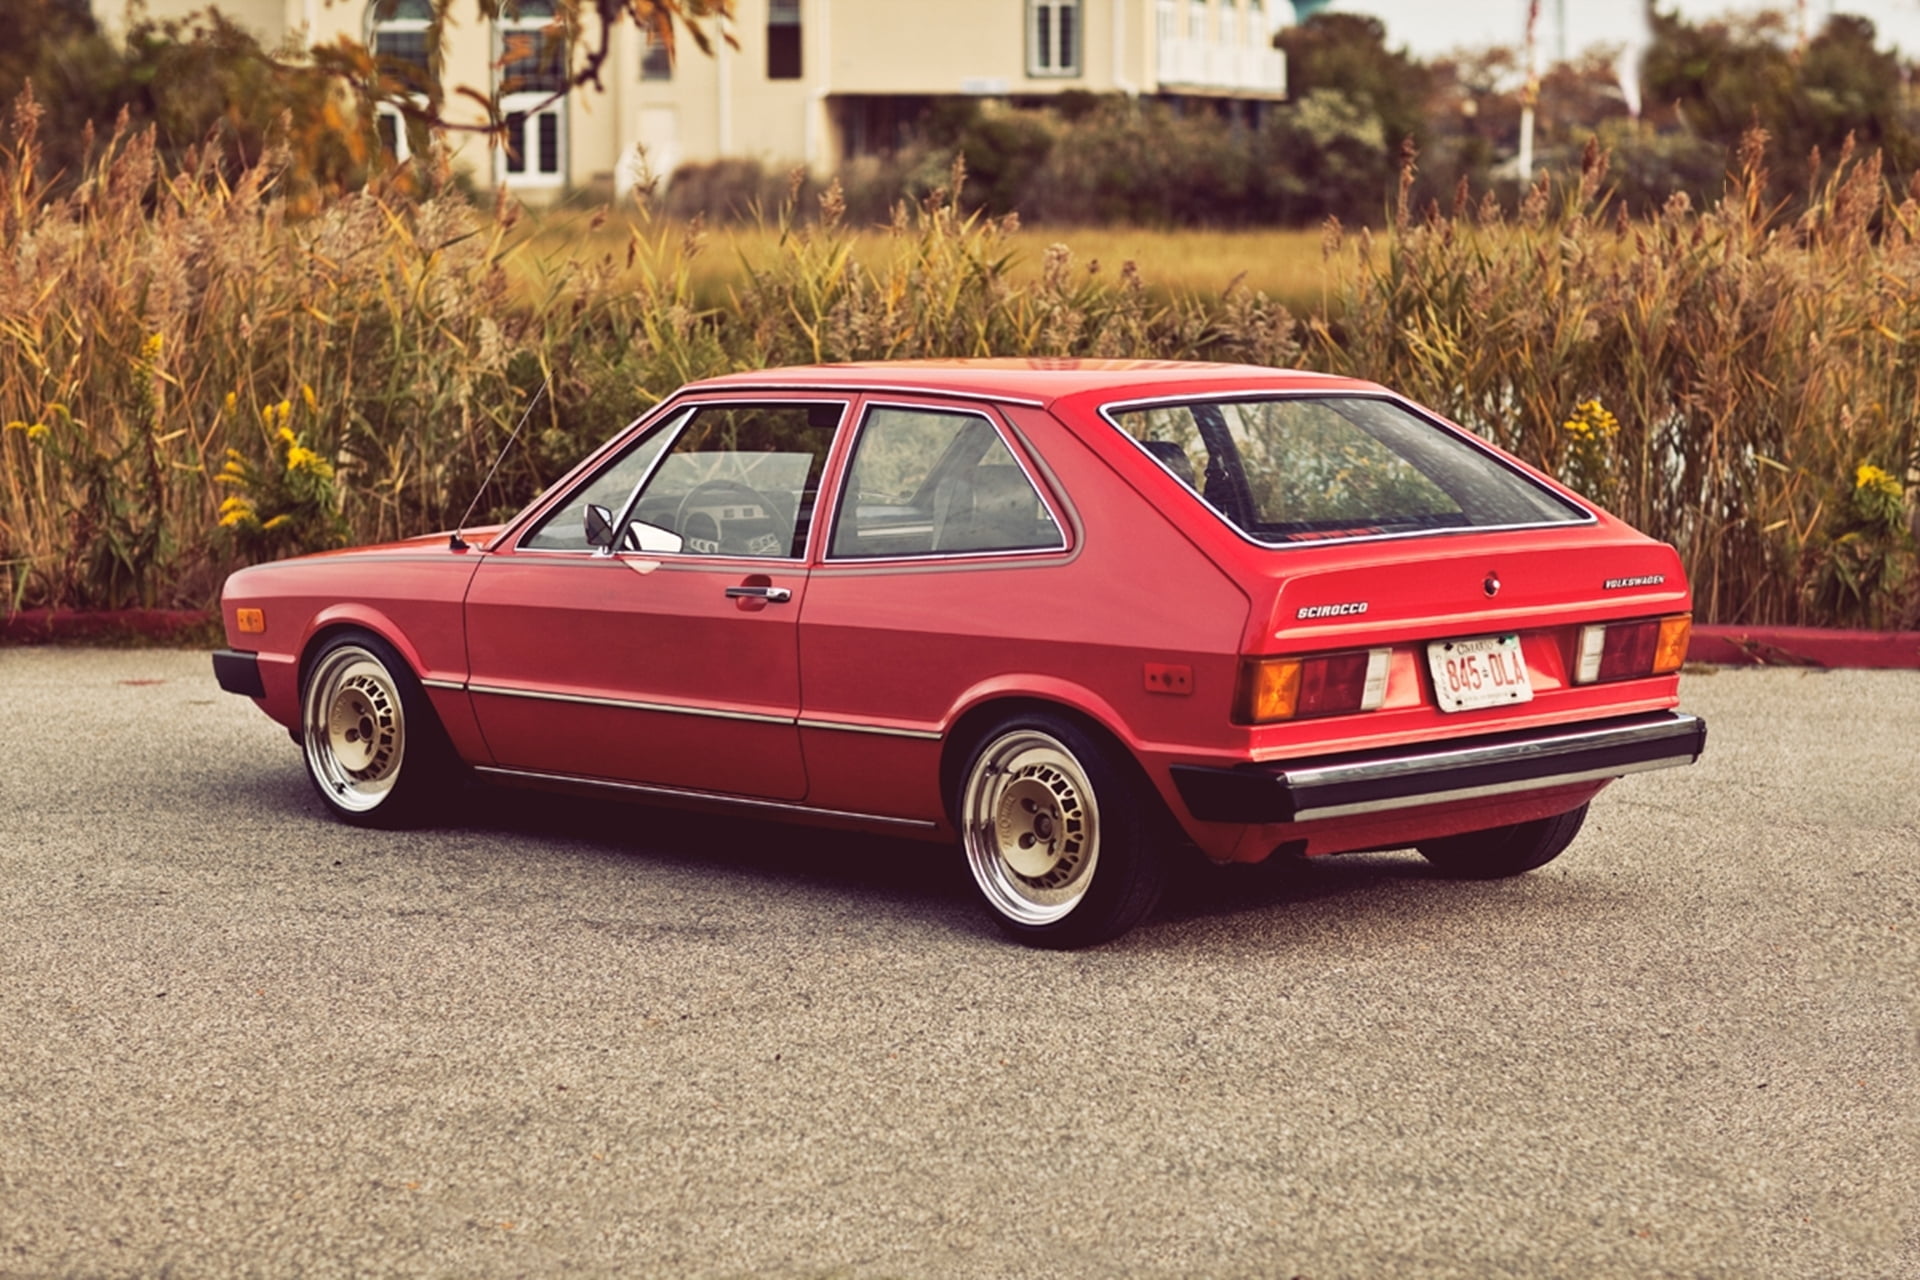 red coupe, volkswagen, vw, scirocco, mk1, 1975, rear view, car